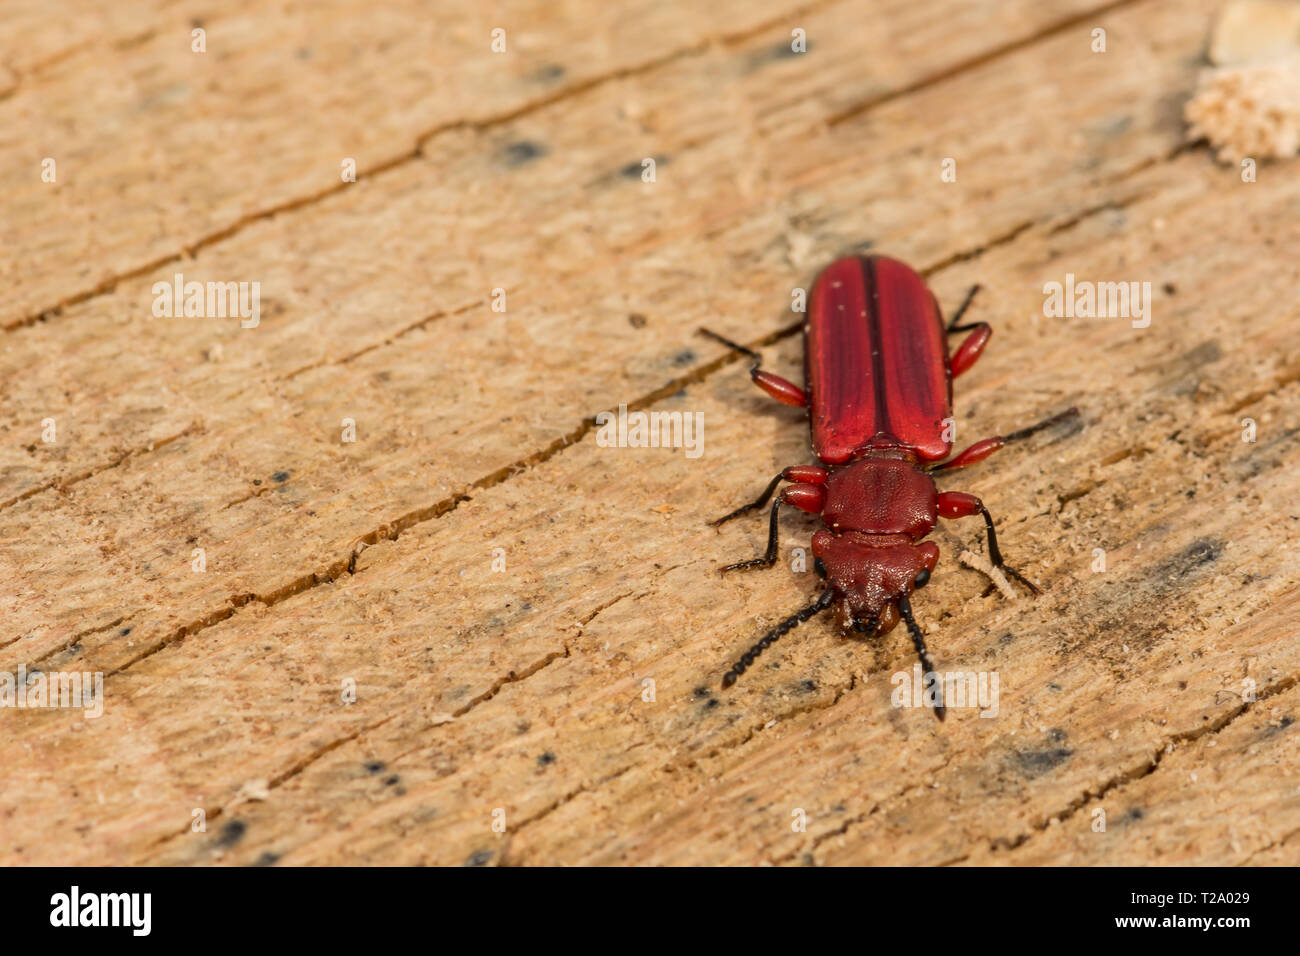 Red Flat Bark Beetle (Cucujus clavipes) Stock Photo